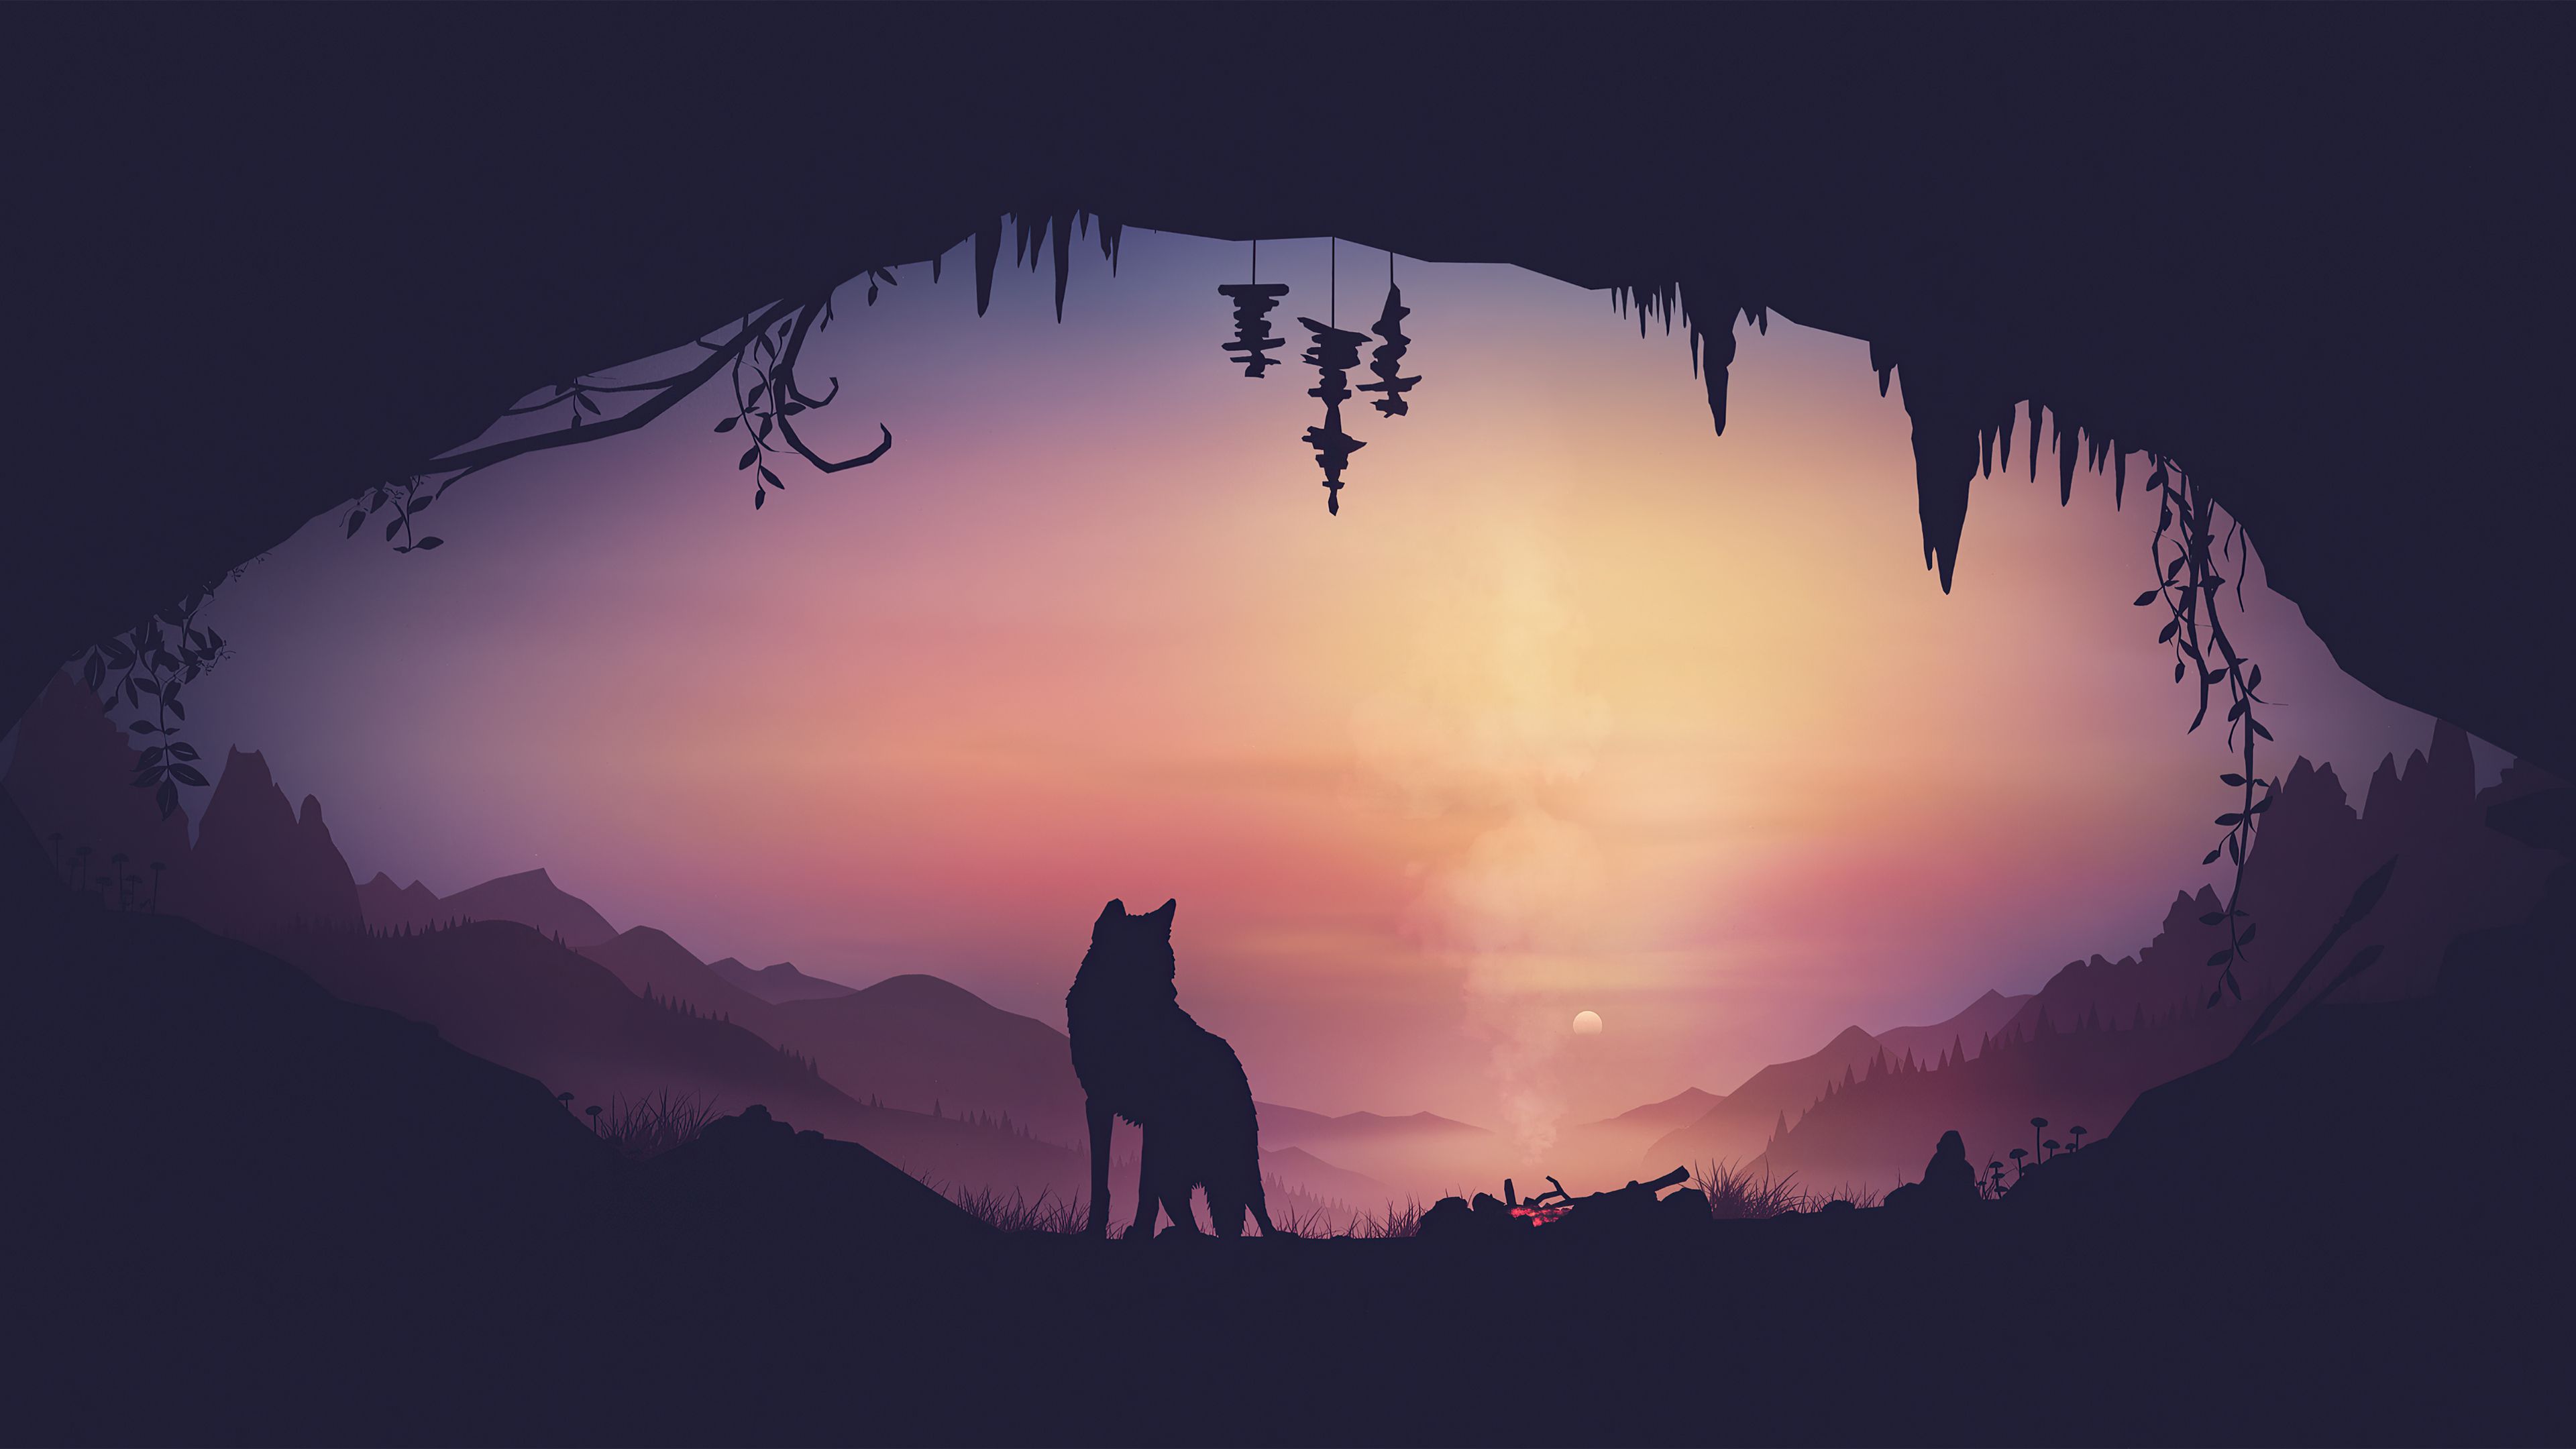 A wolf howling at the sunset in a cave wallpaper 1920x1080 - Wolf